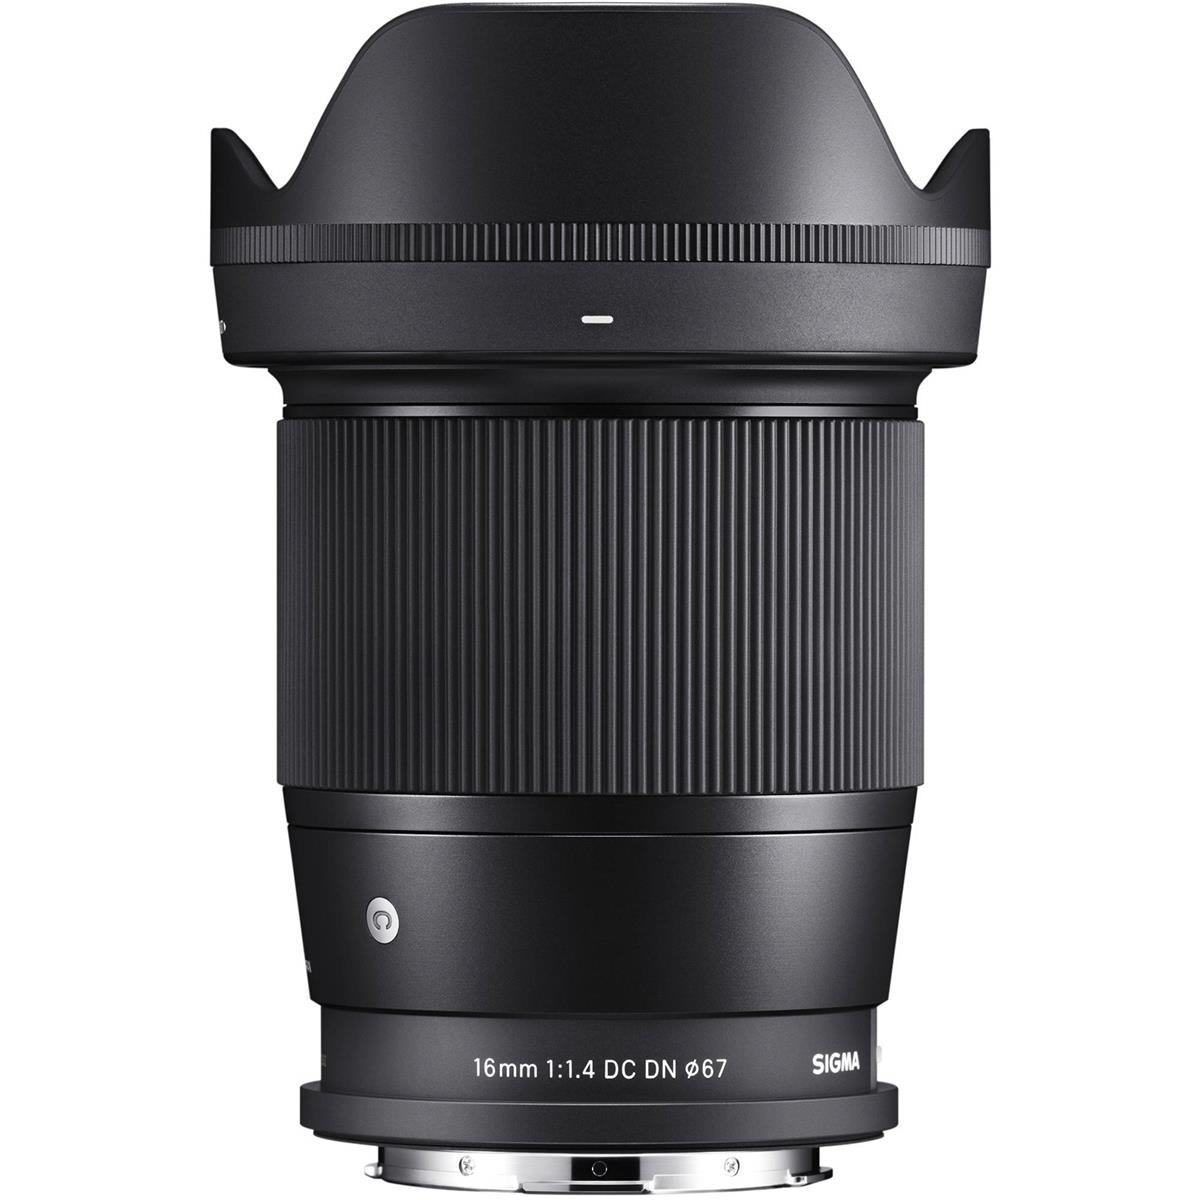 Sigma 16mm f1.4 DC DN Canon EF-M or Leica L Contemporary Lens for $299 Shipped